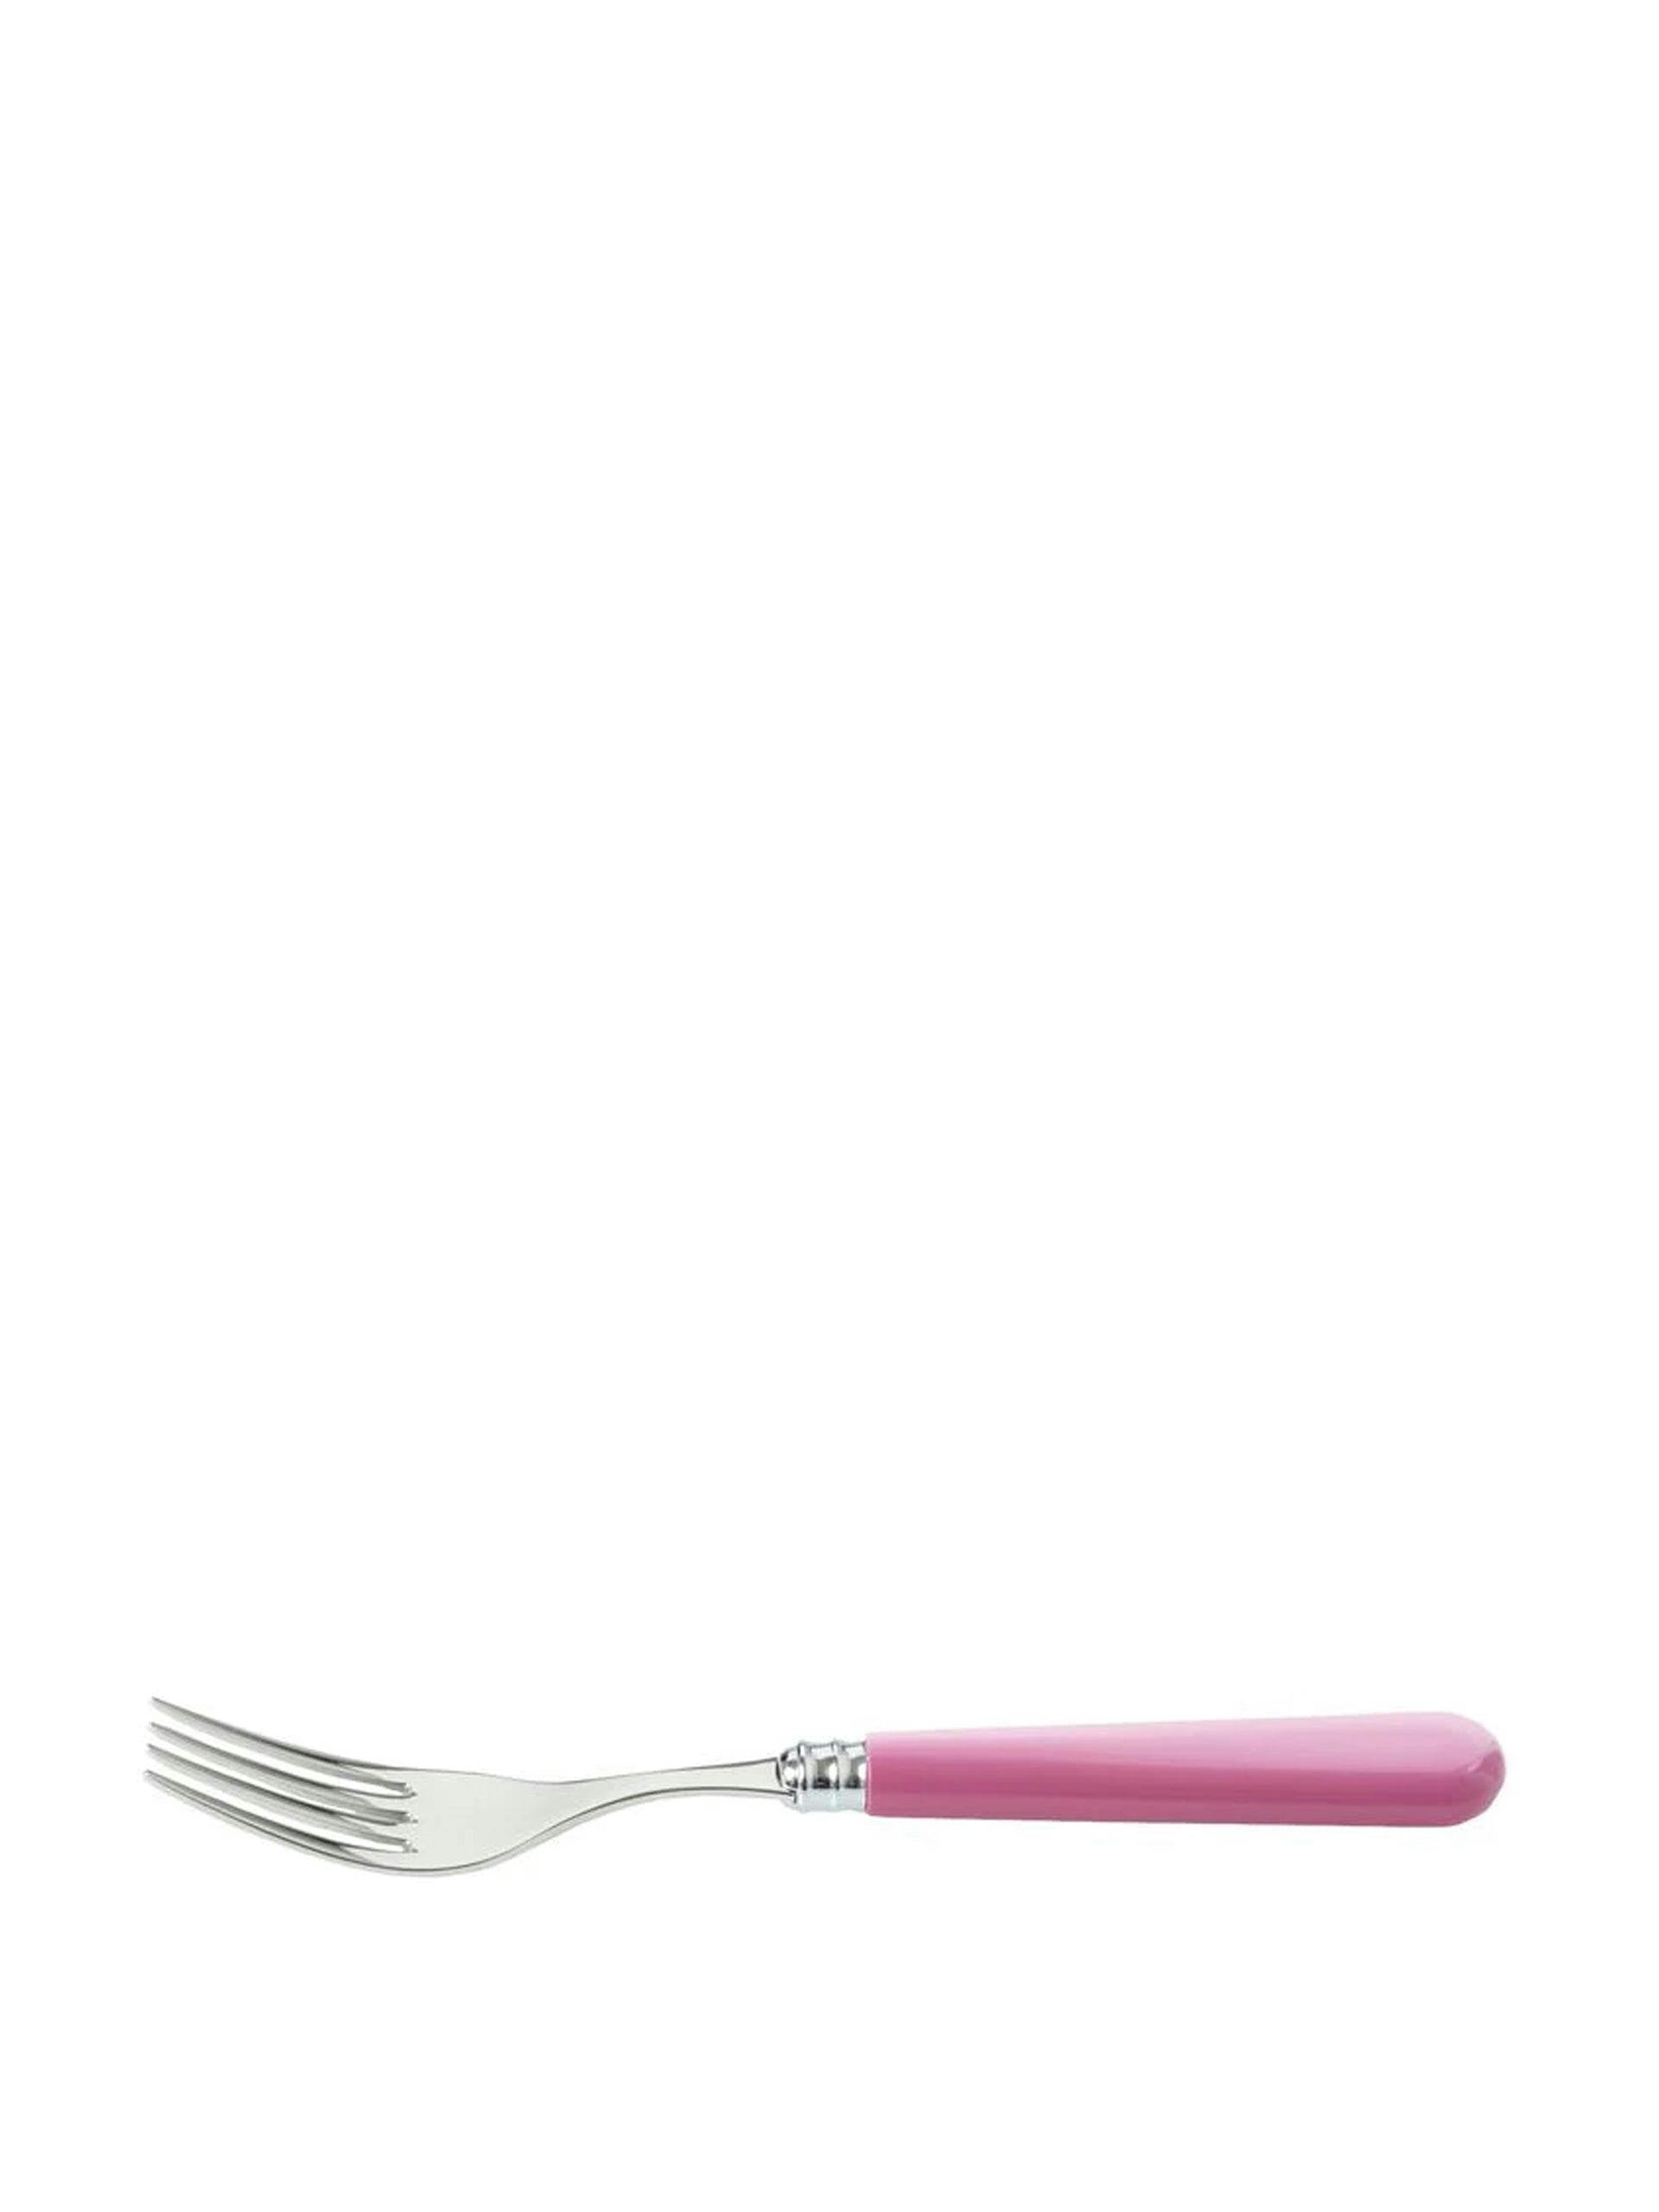 Mix and match colourful french stainless steel cutlery